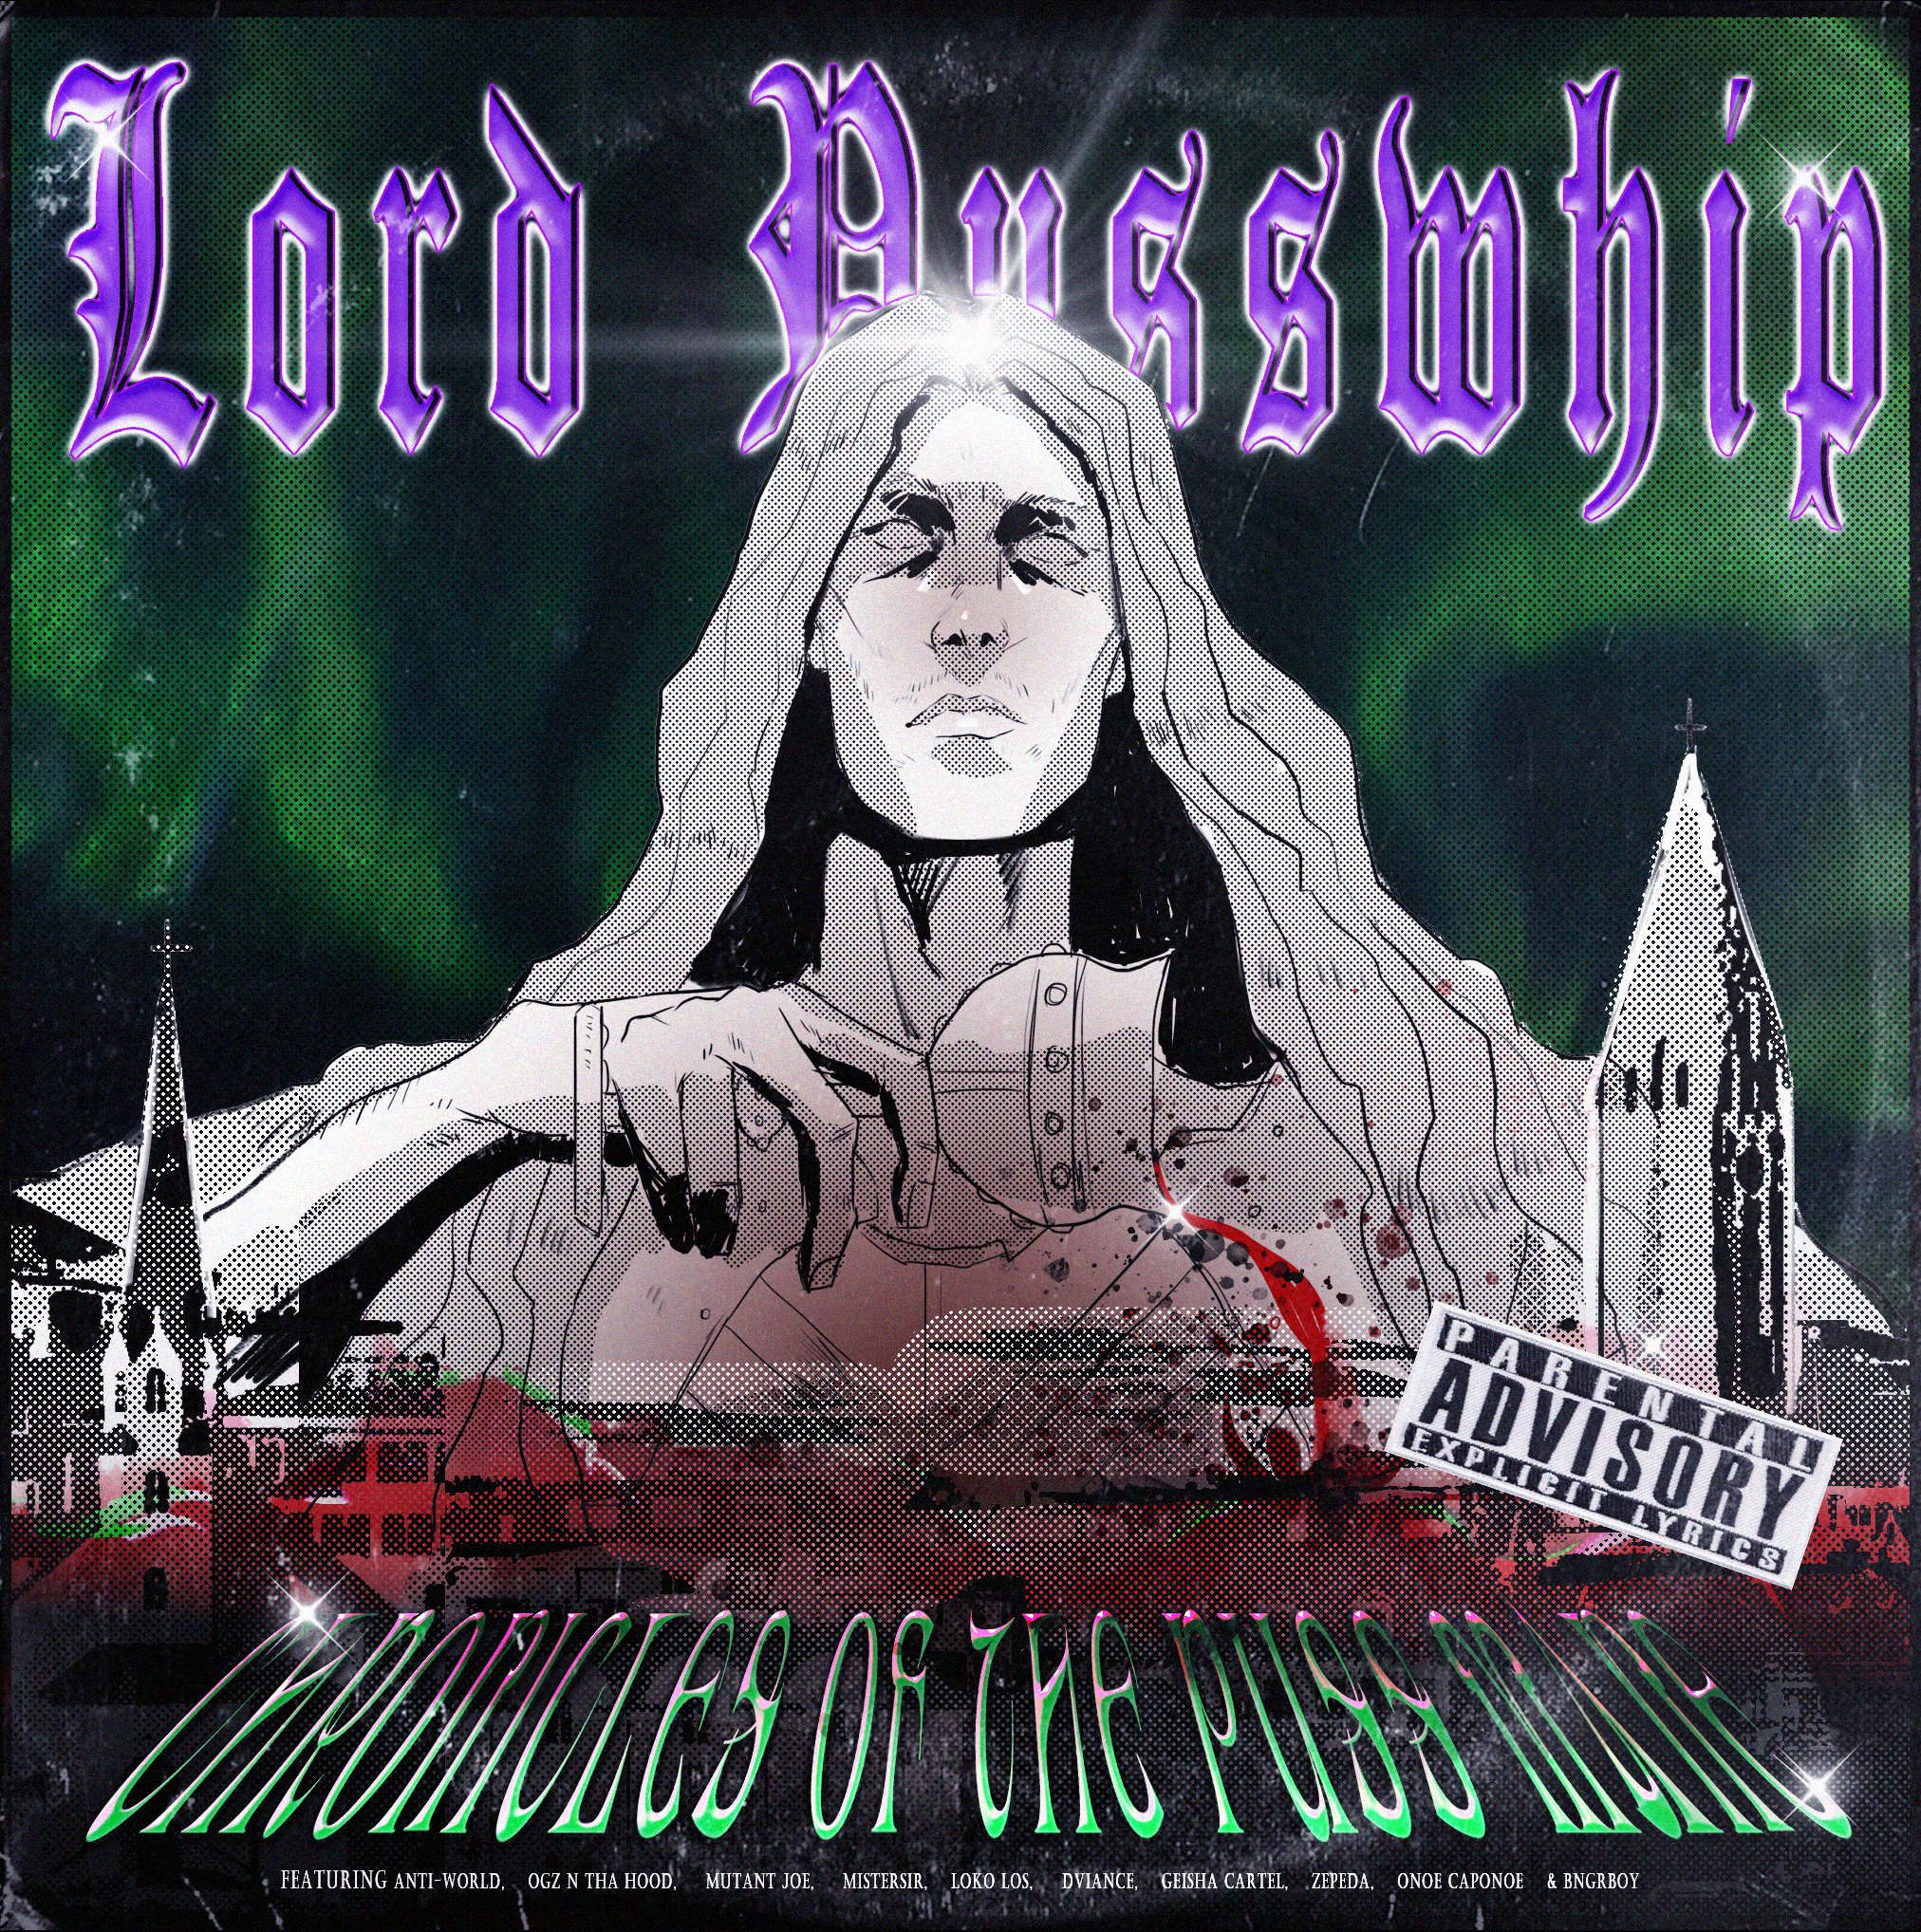 Lord Pusswhip Twitterissa Https T Co 1pfolb93ci Chronicles Of The Puss Mane Compilation Mix Of Pusswhip Rarities B Sides And Unreleased Works From Recent Years Featuring Anti World Ogz N Tha Hood Mutant Joe Mistersir Loko Los Find out new released 'telugu songs' with their lyrics in english (roman) script. twitter